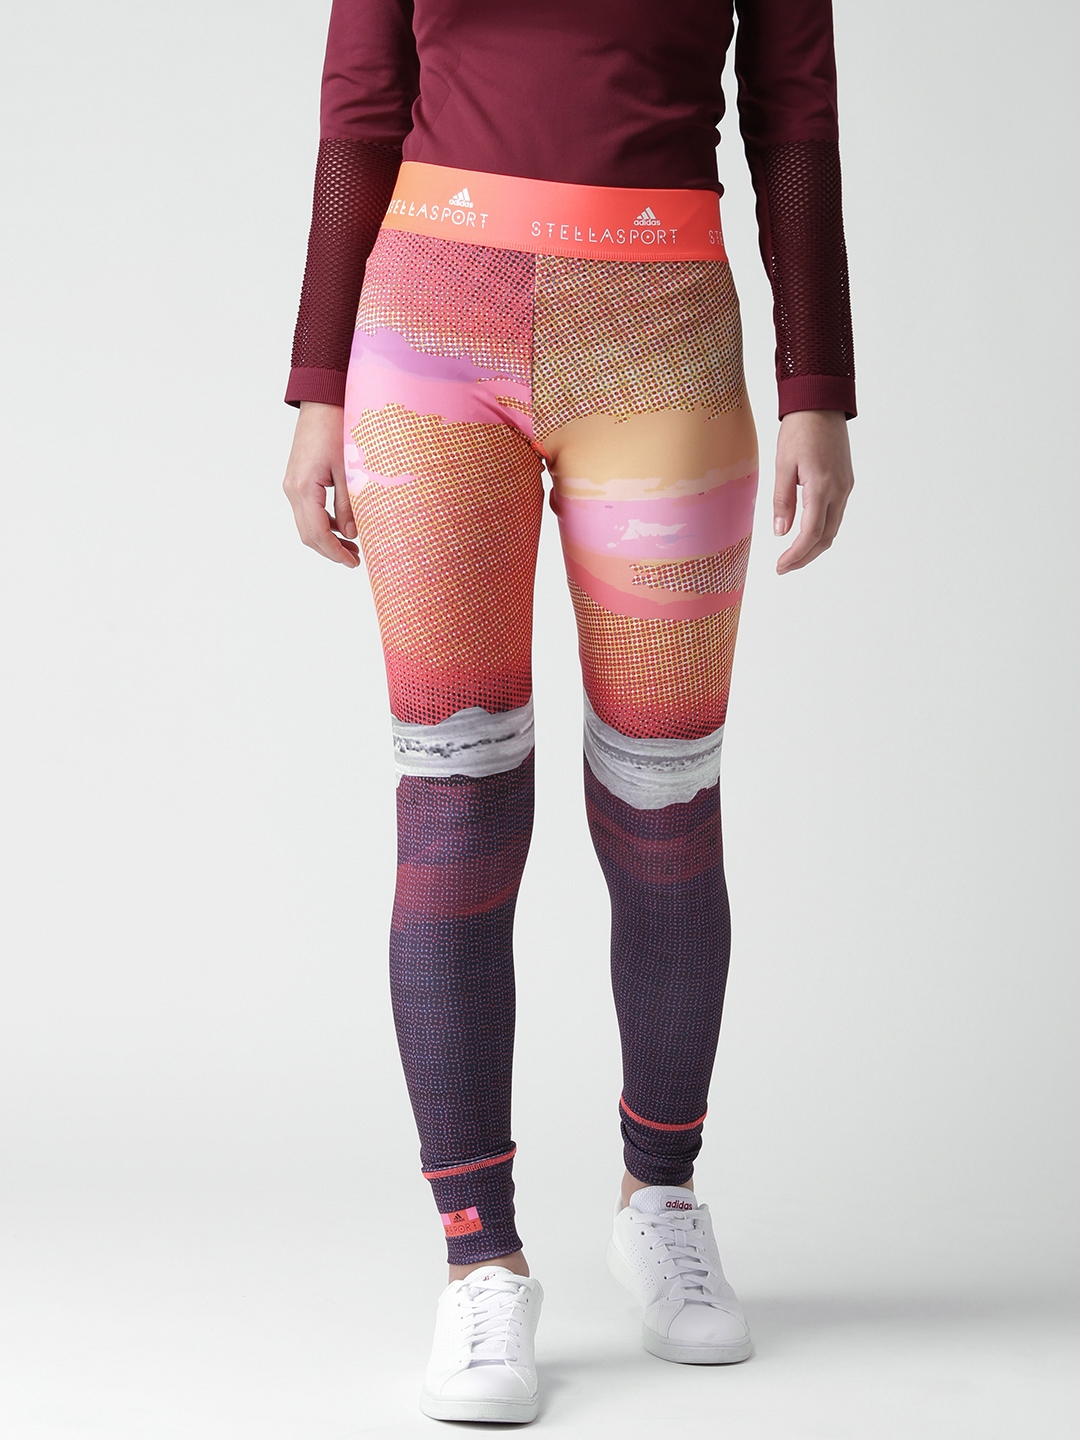 Buy ADIDAS STELLASPORT Multicoloured Nature Tights - Tights for 1759600 Myntra